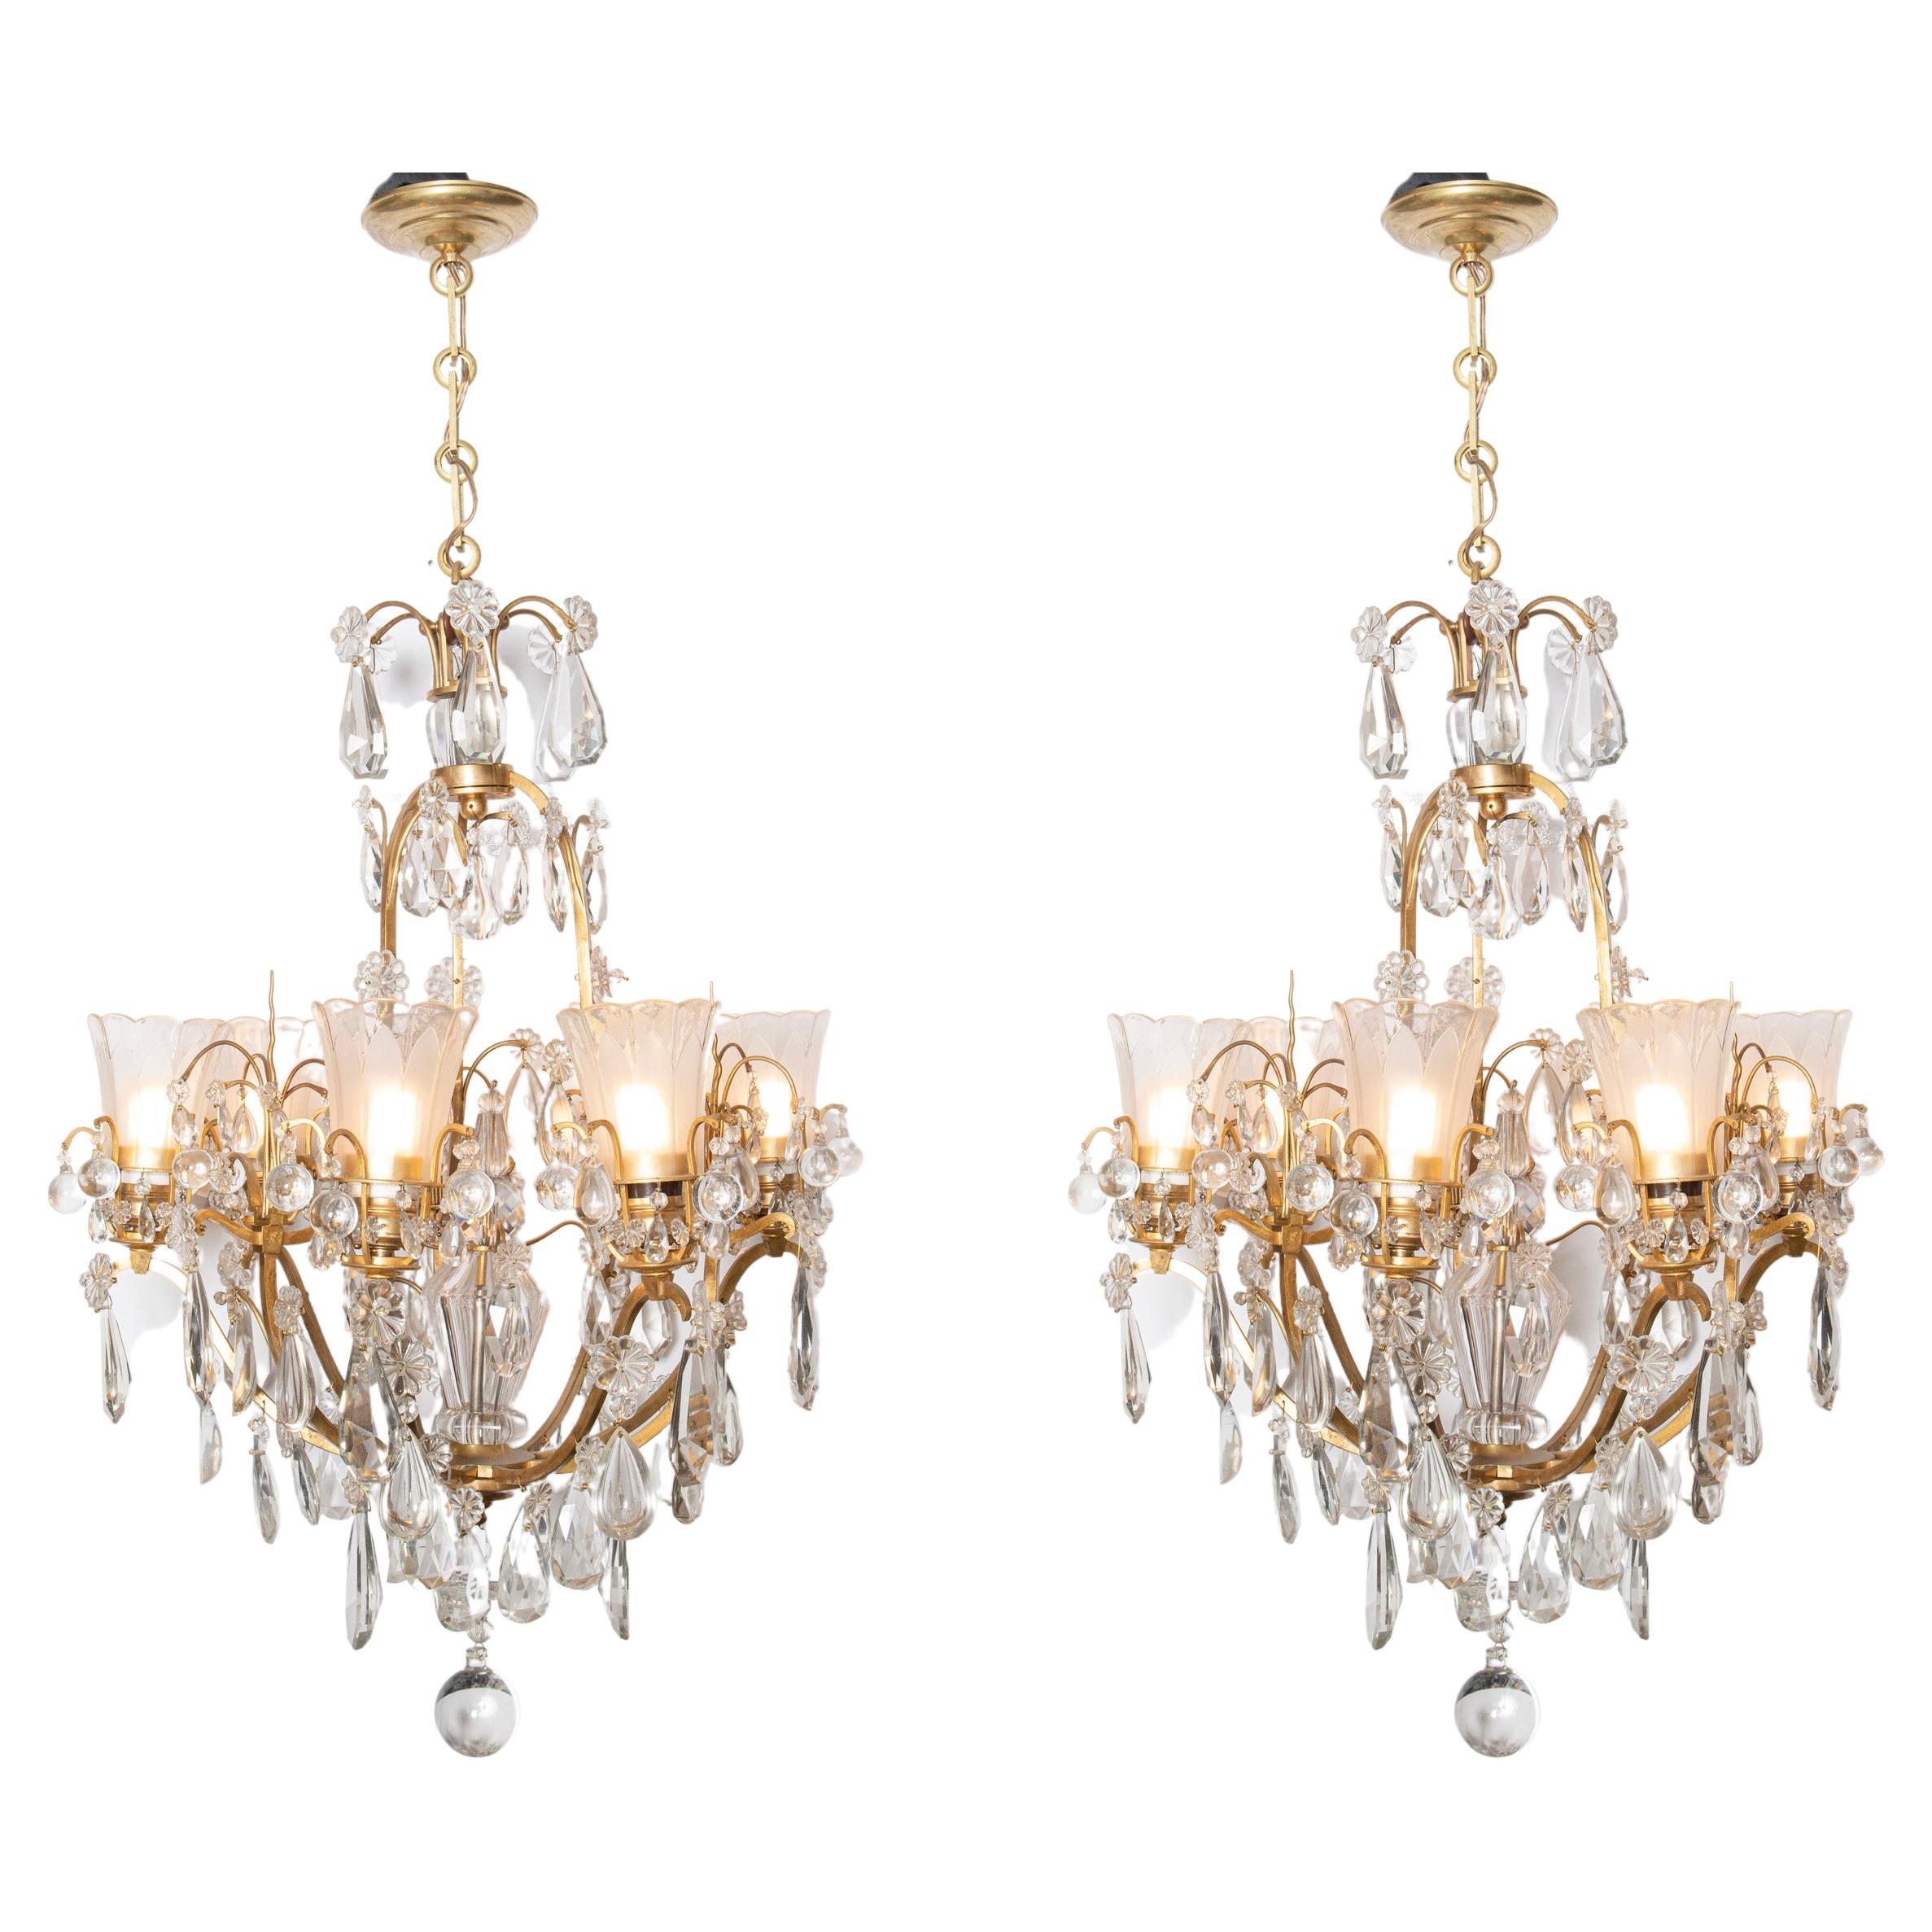 Pair of bronze and crystal chandeliers. France, circa 1940.